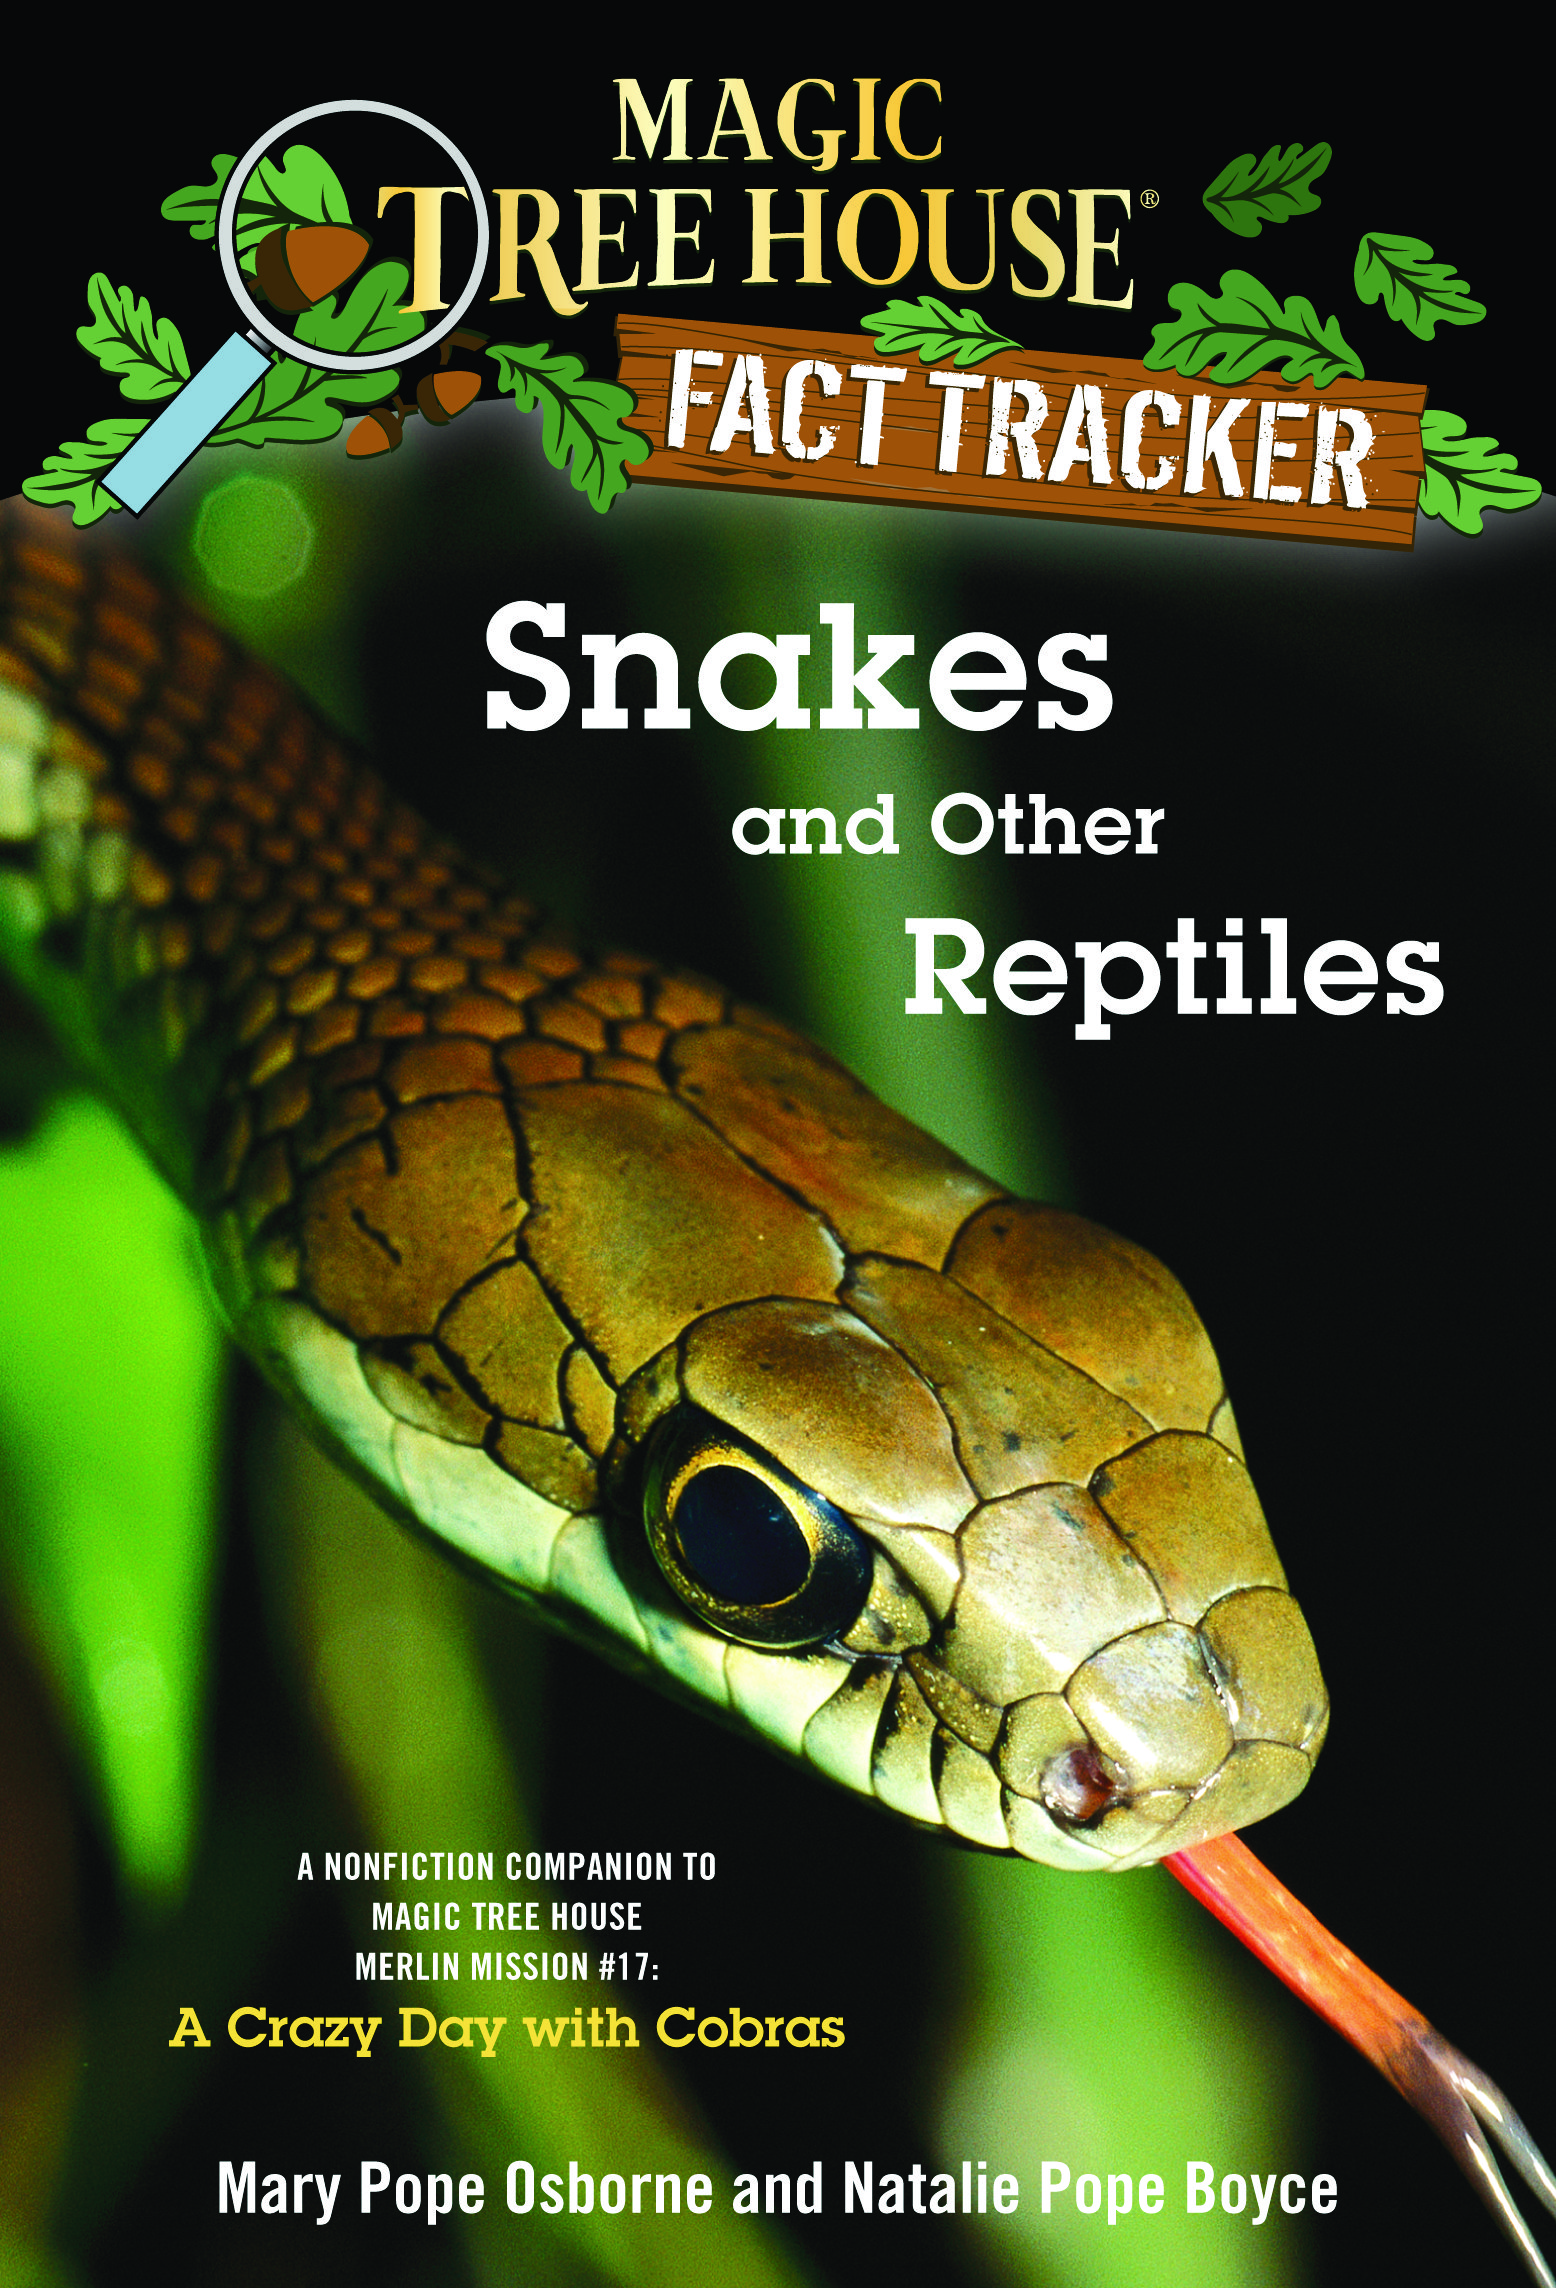 Magic Tree House Fact Tracker #23 Snakes and Other Reptiles